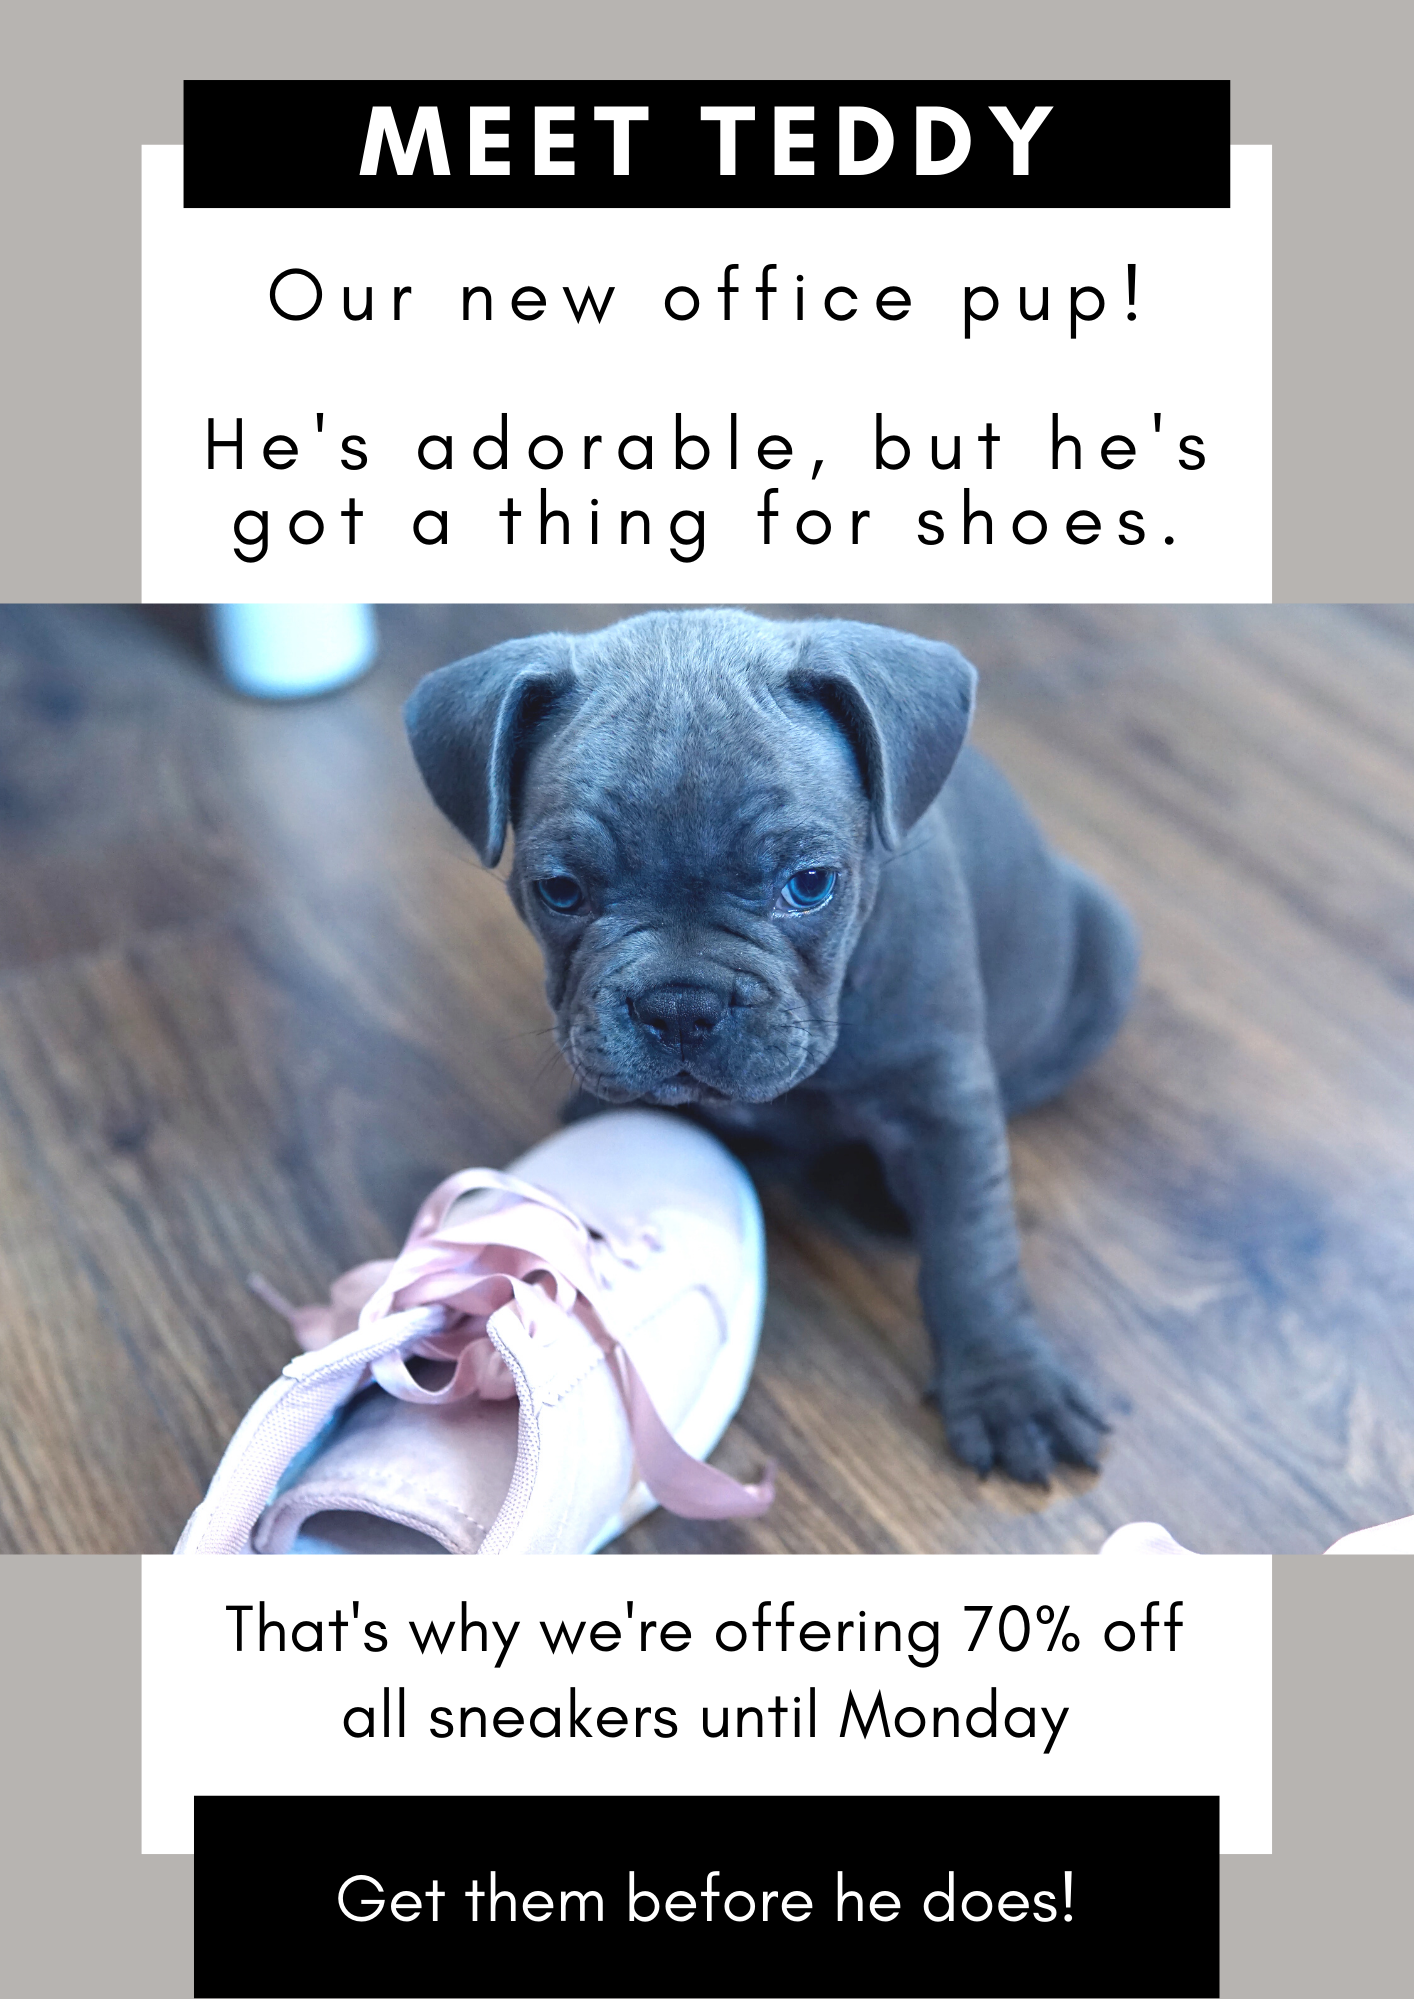 Storytelling: Poster with an image of a grey french bulldog puppy with a white sneaker with pink laces. Text reads: Meet Teddy. Our new office pup! He's adorable, but he's got a thing for shoes. That's why we're offering 70% off all sneakers until Monday. Get them before he does! 